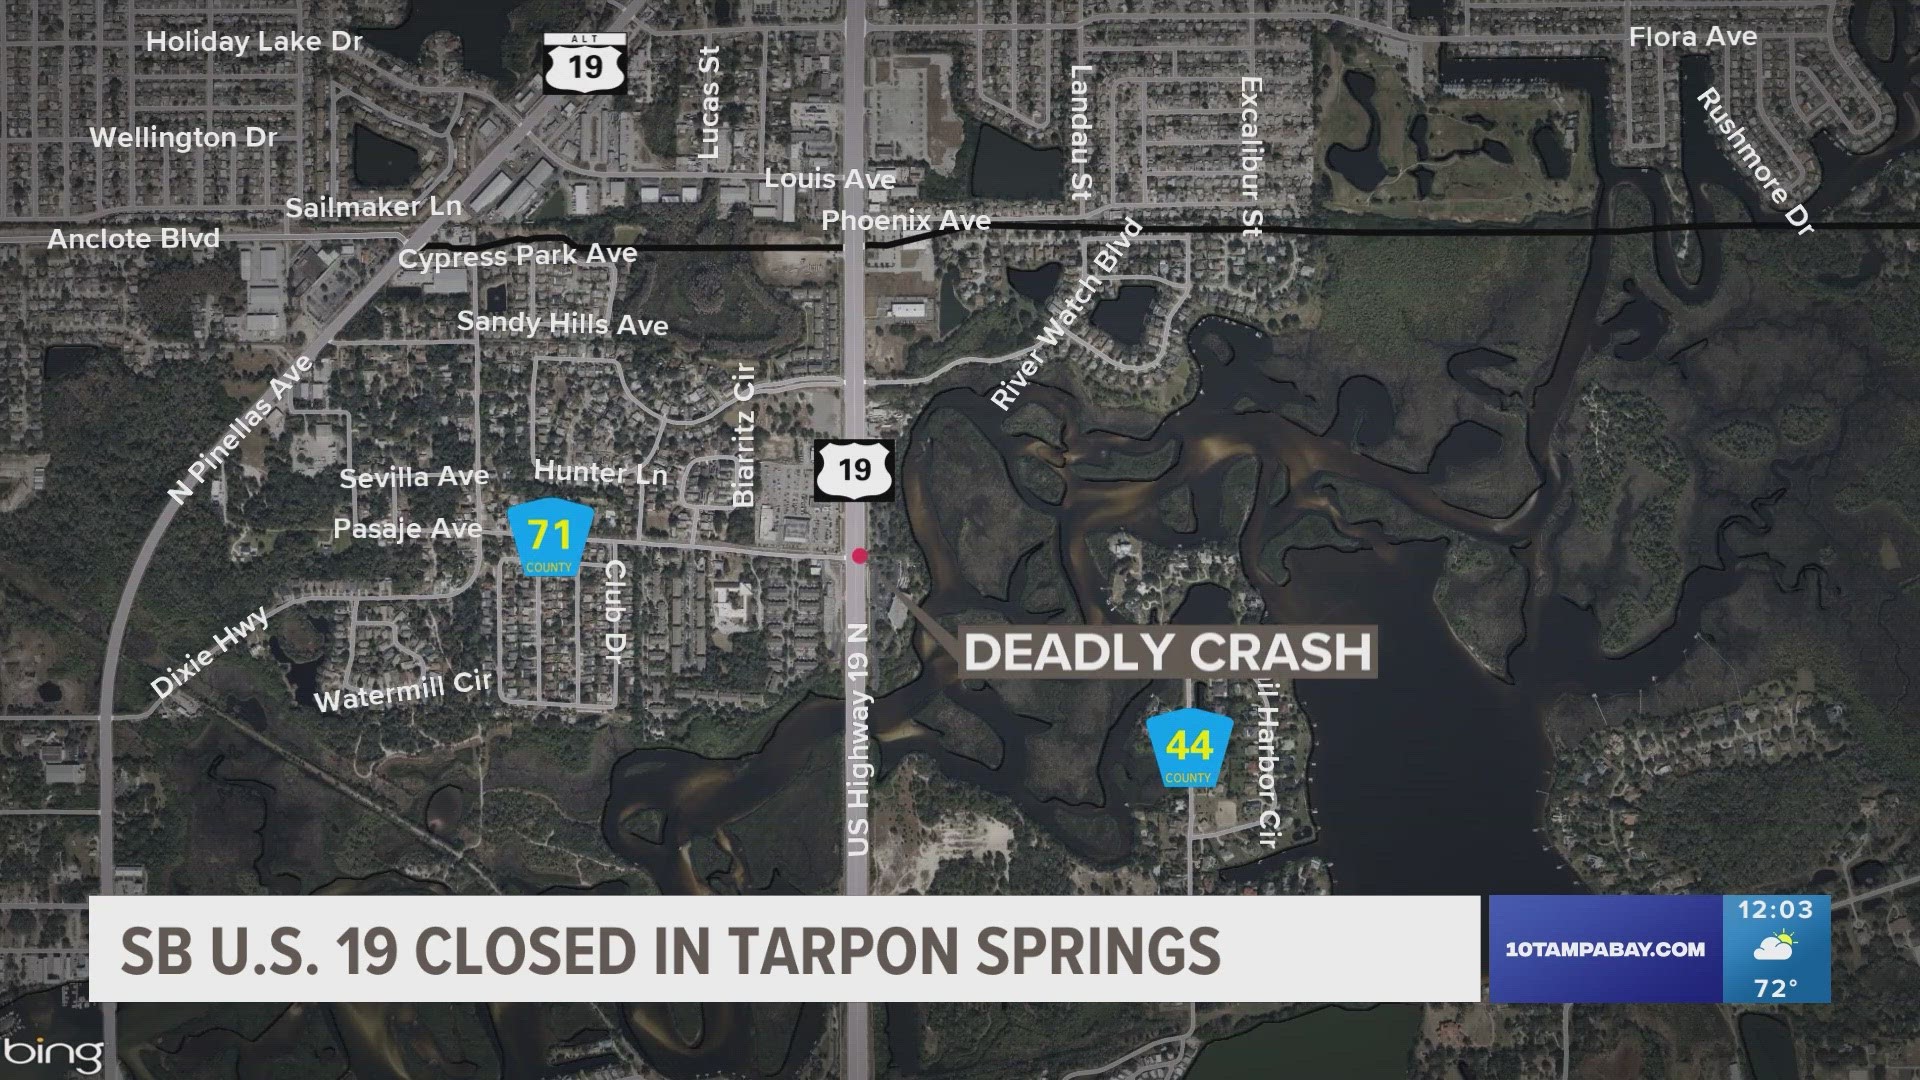 People who may have witnessed the crash are asked to call the Tarpon Springs Police Department.